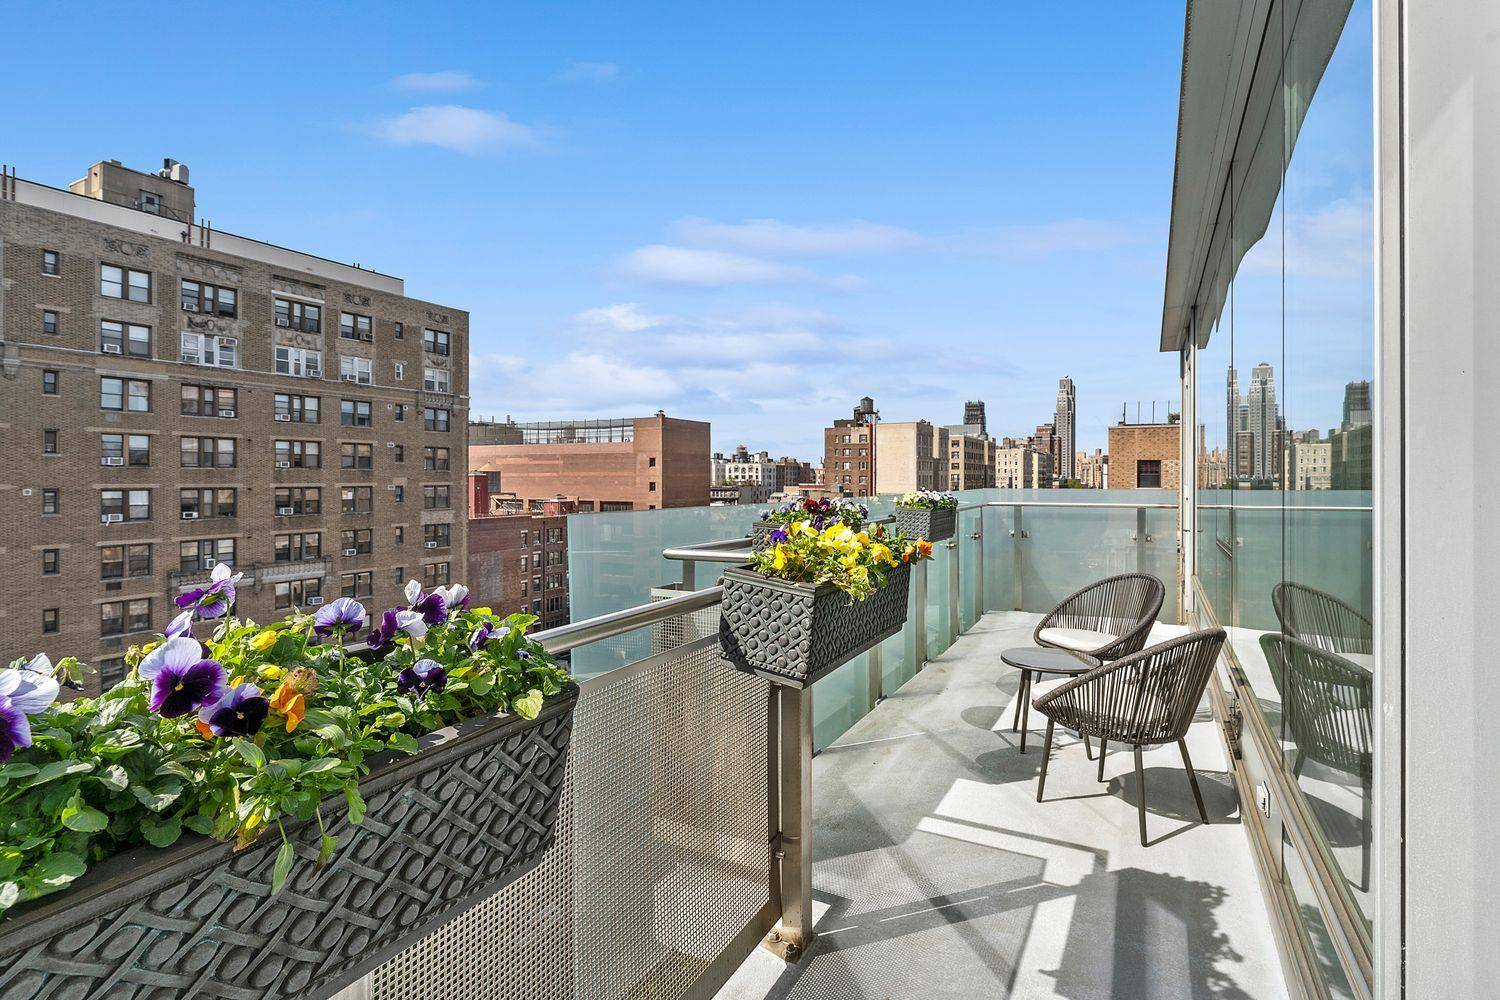 Penthouse terrace lovers, look no further !